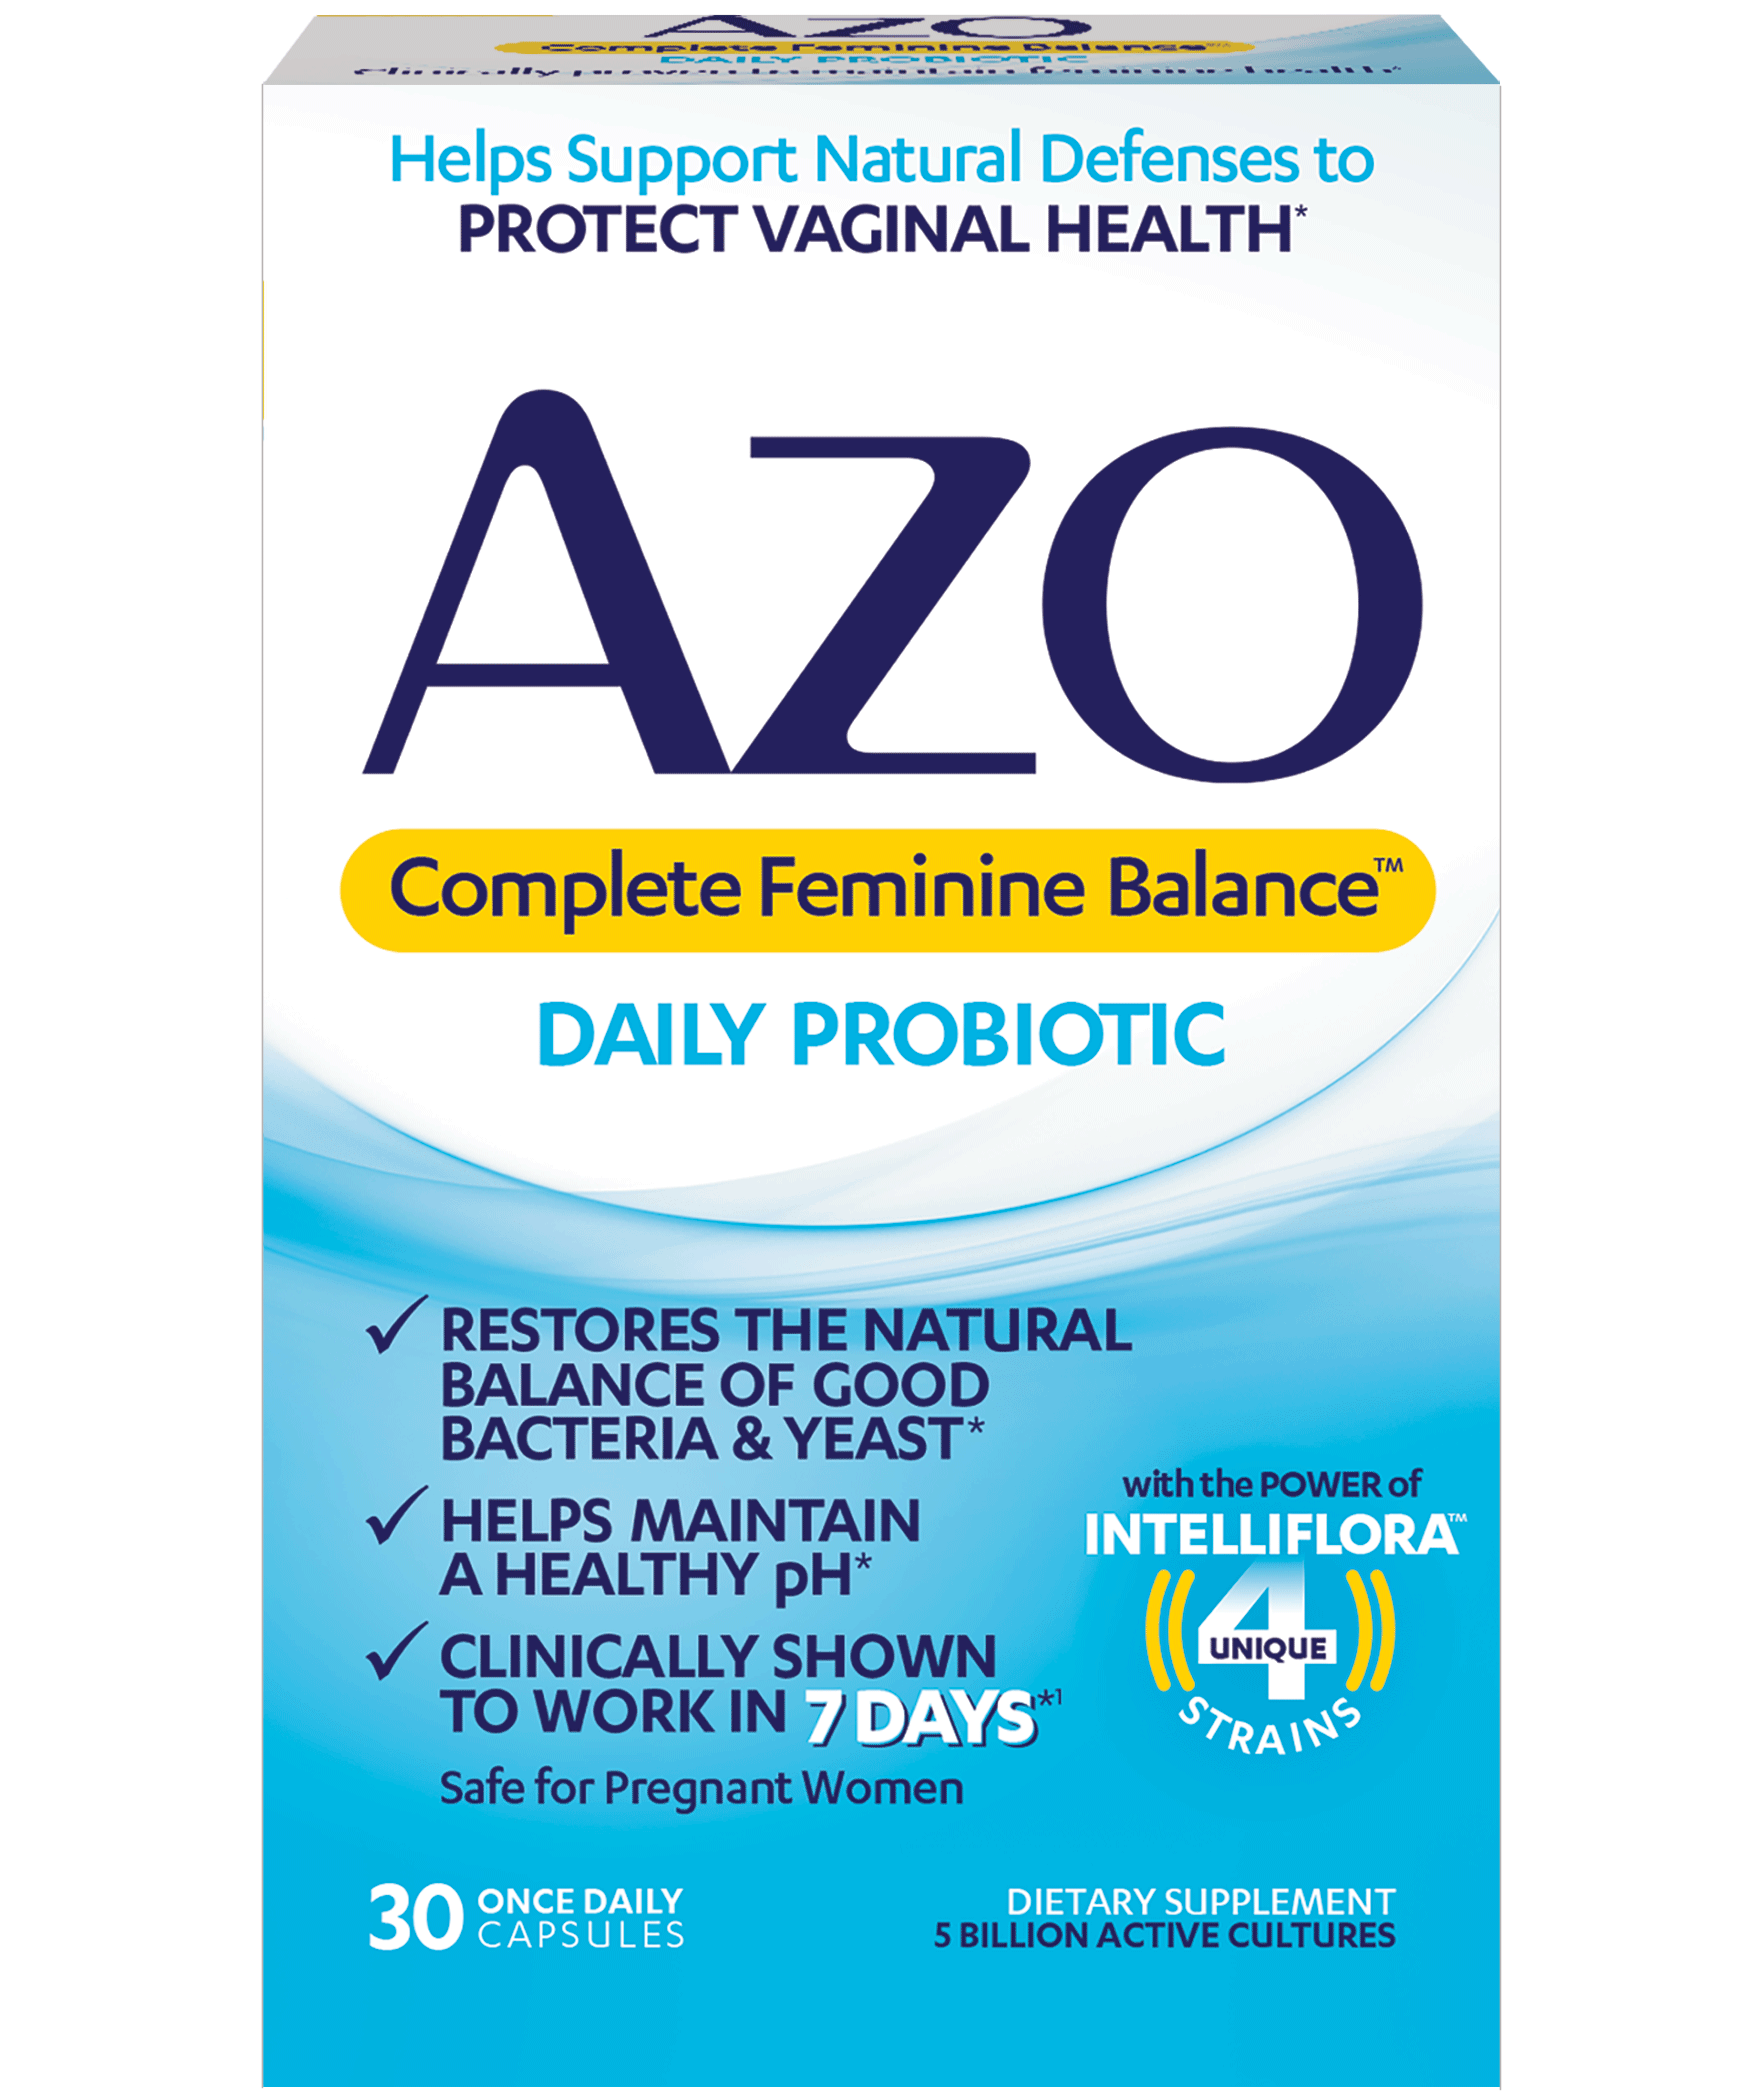 AZO Complete Feminine Balance Daily Probiotic for Women, 30 ct